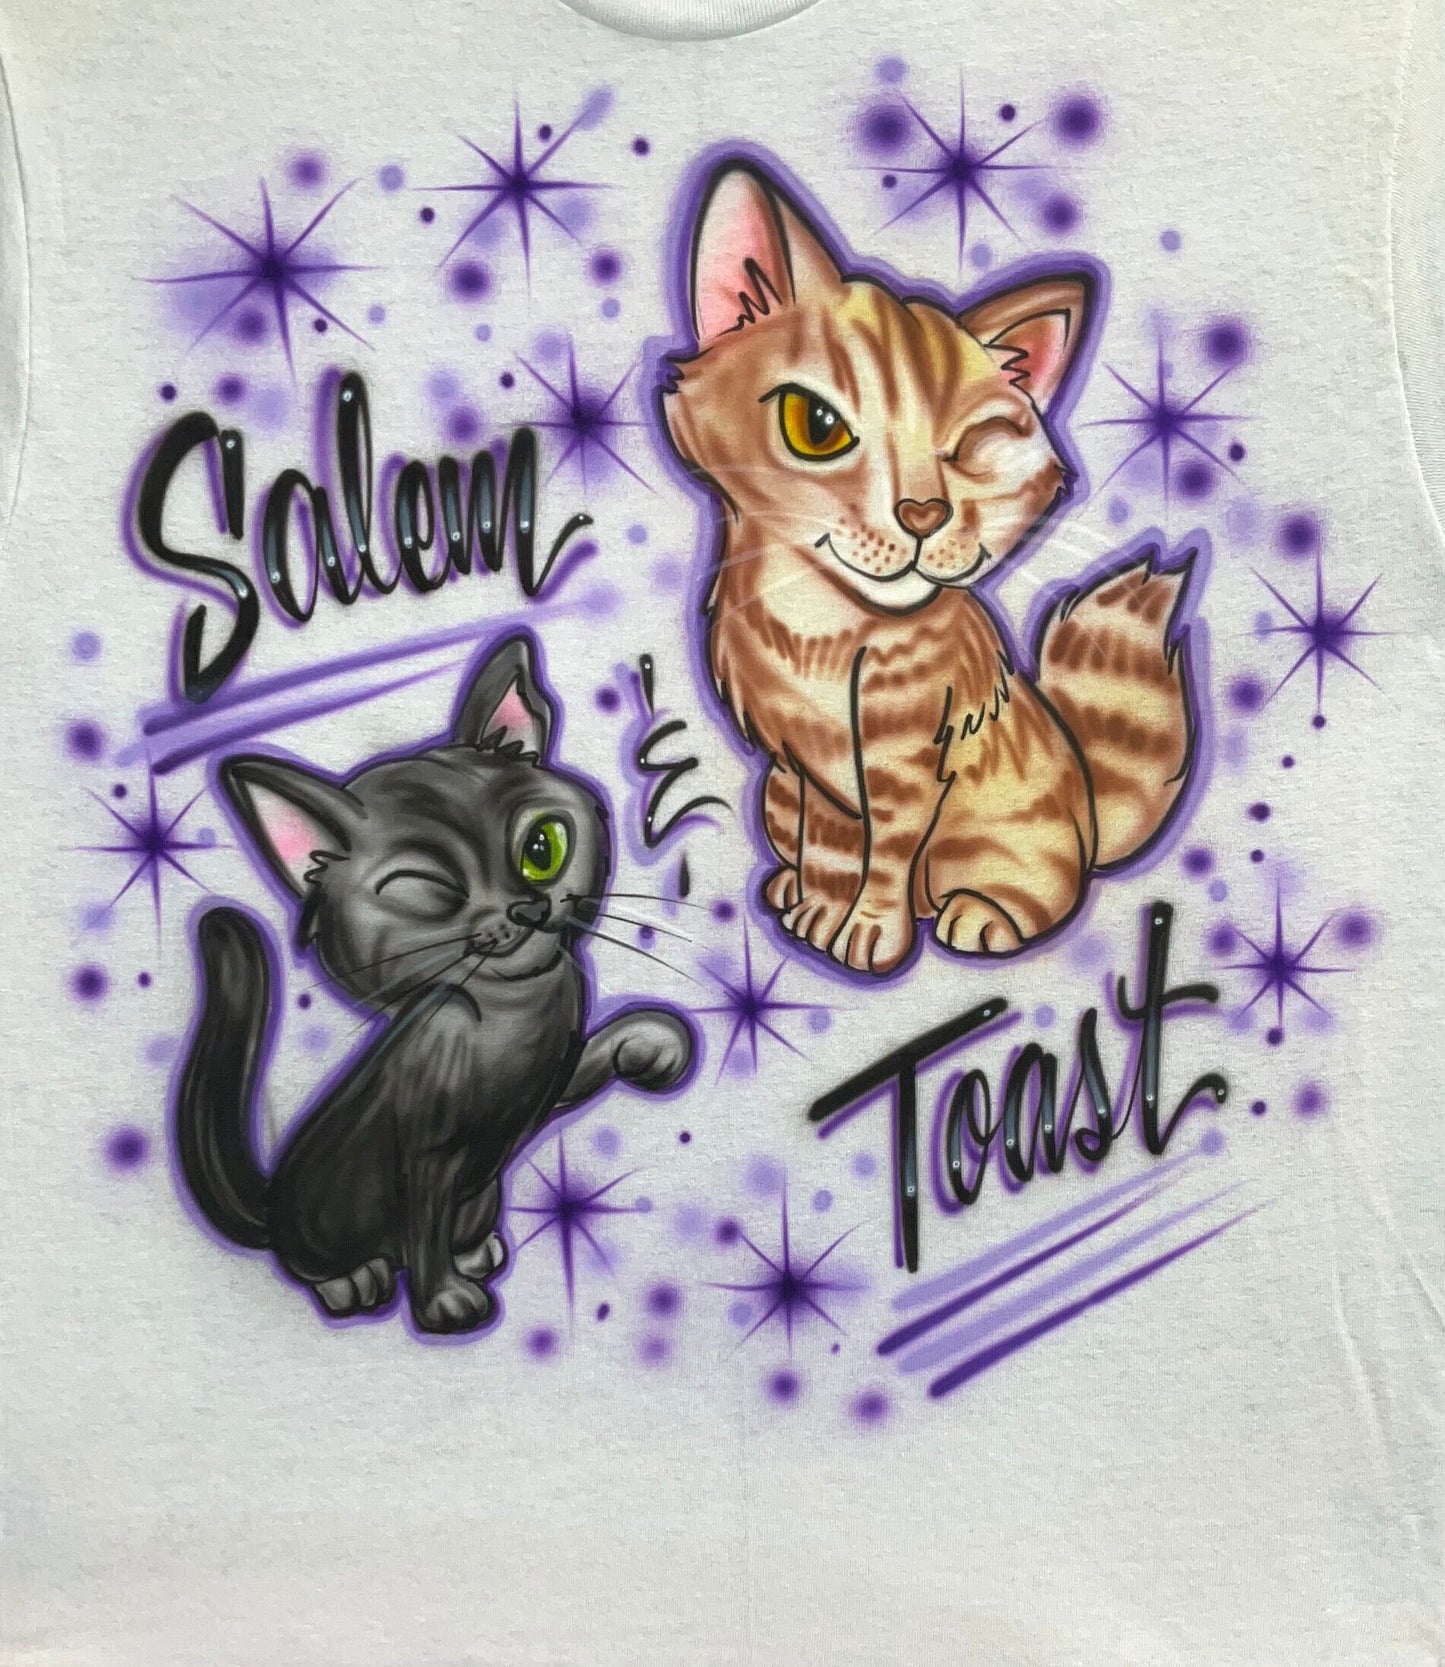 Airbrush T-Shirt - Two Kittens - Your names - Personalized - Cats